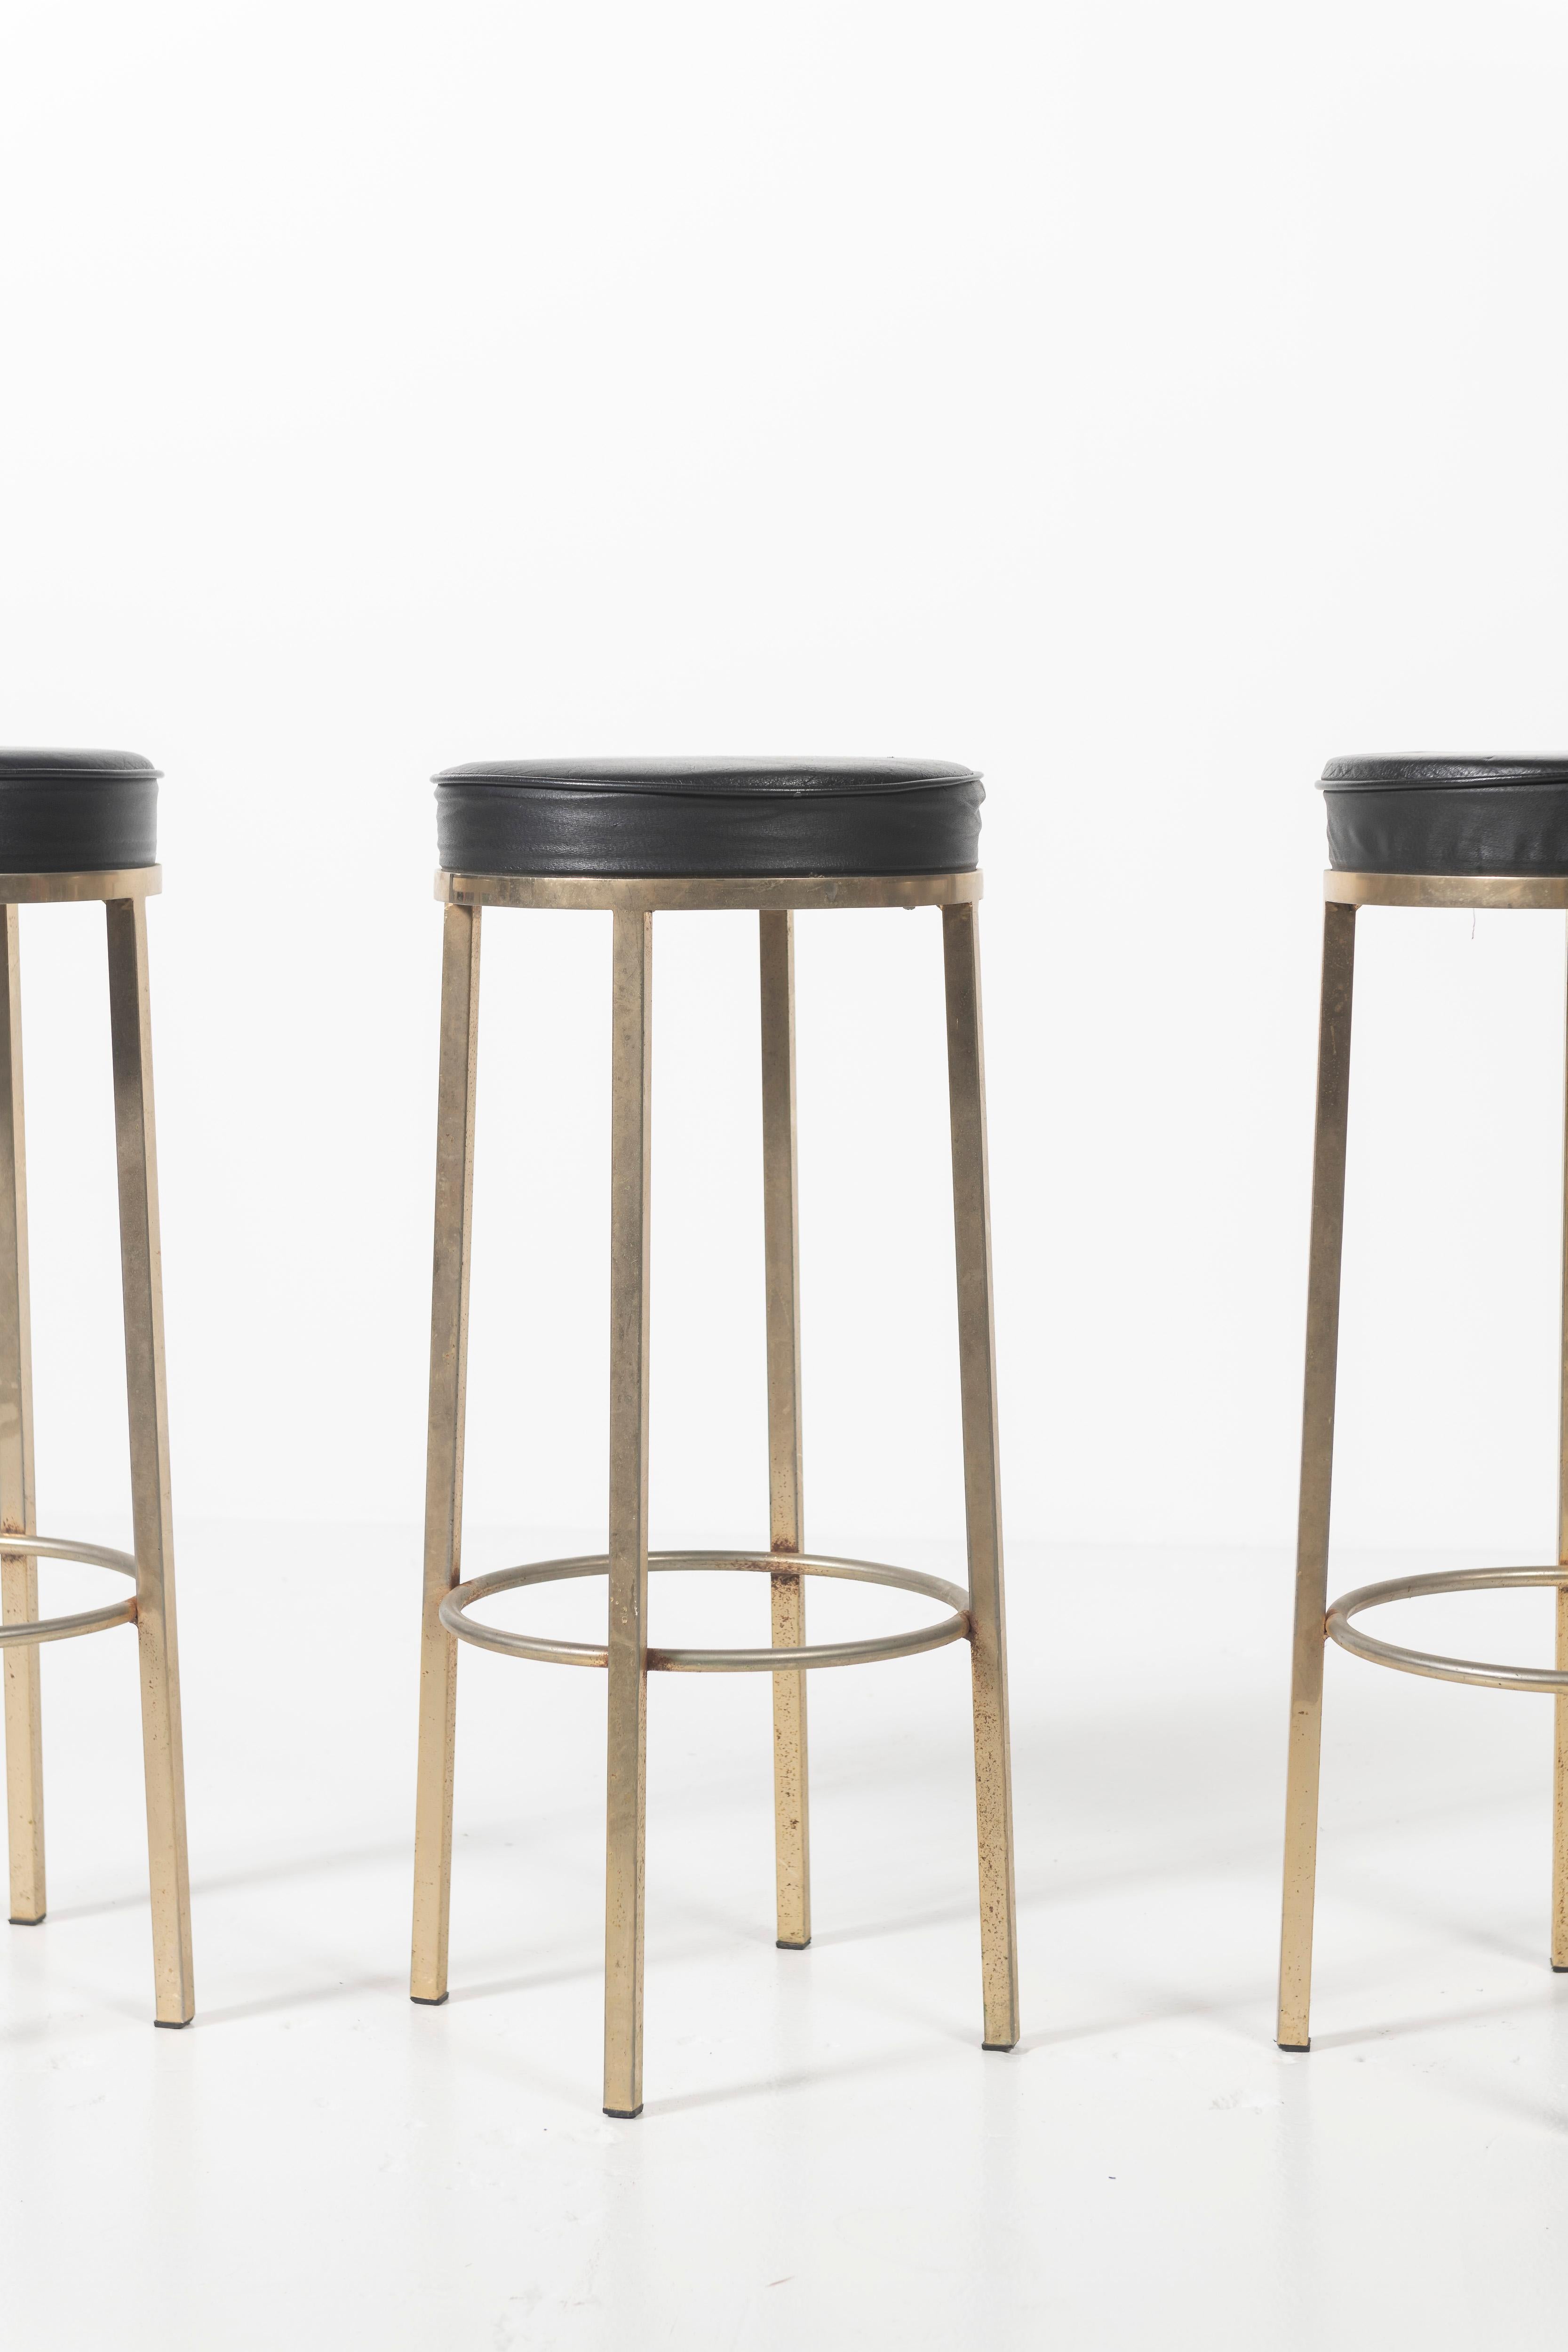 Three bar stools with a circular black leather seat, with four metal legs joined by a a circular support. Sturdy and attractive, perfect for home bar or counter seating in good vintage condition.